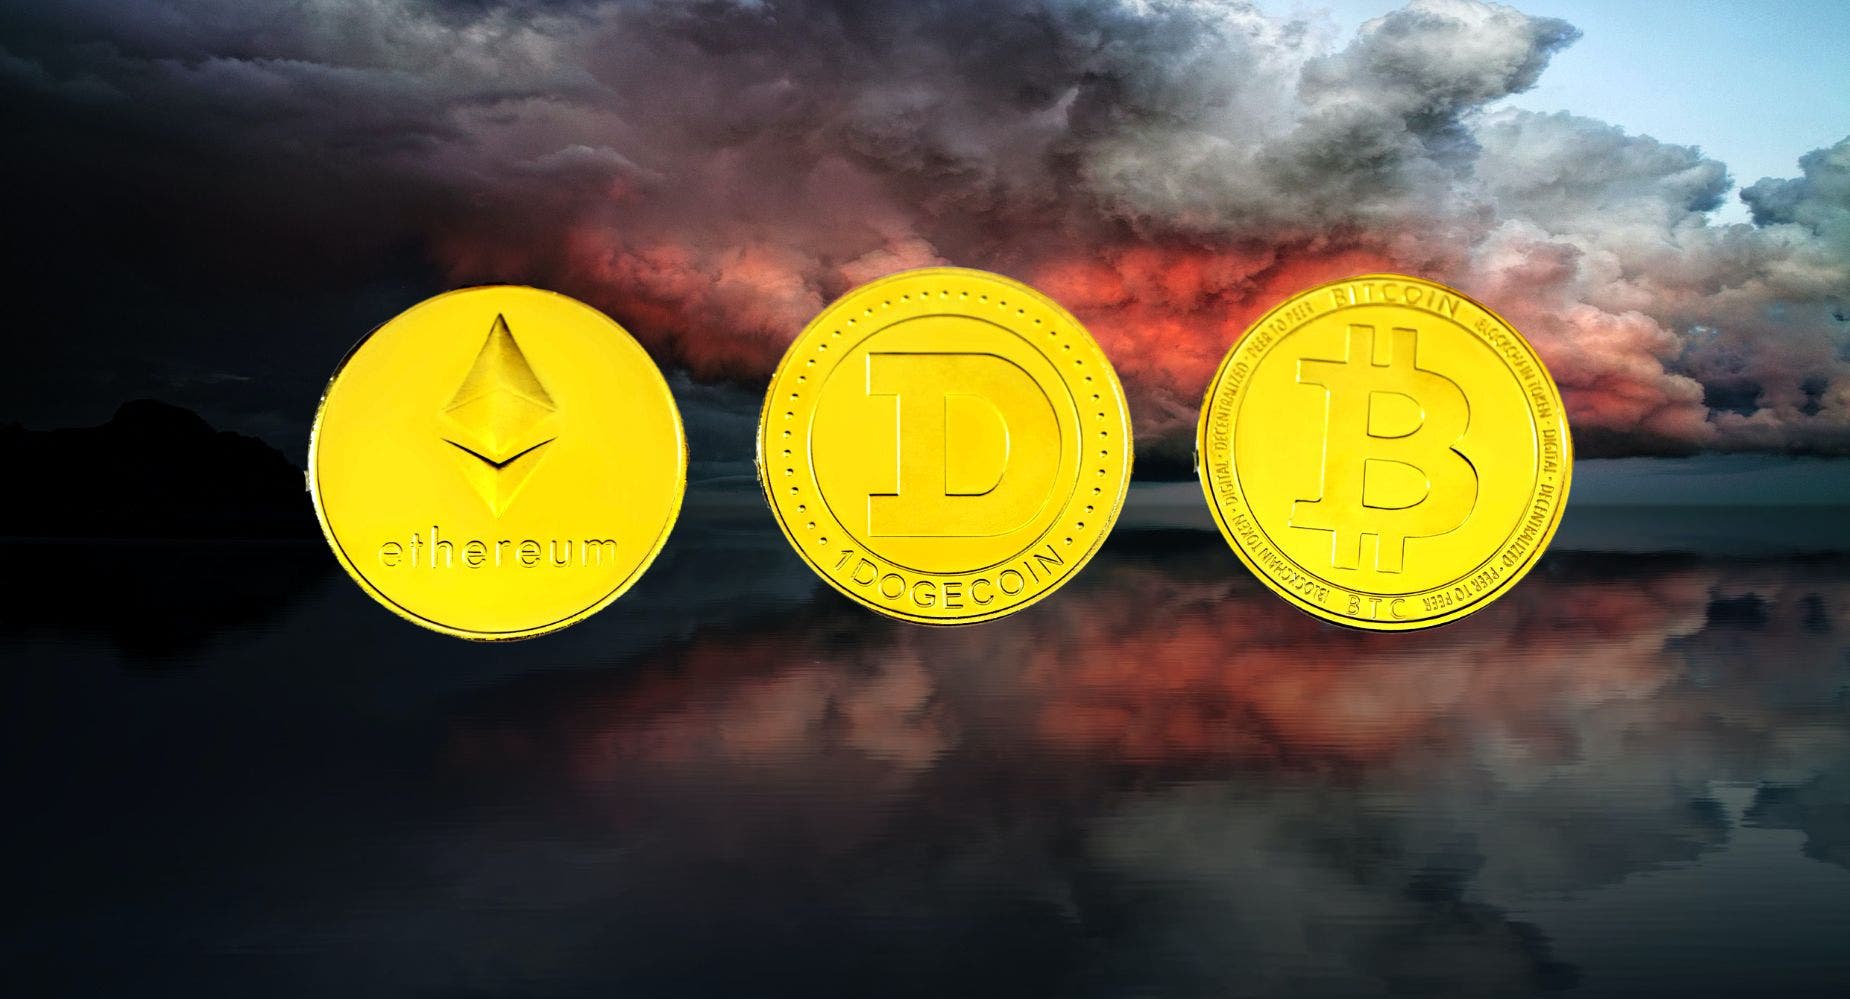 Bitcoin, Ethereum And Dogecoin Plunge In Reaction To CPI Data: What's Going On?